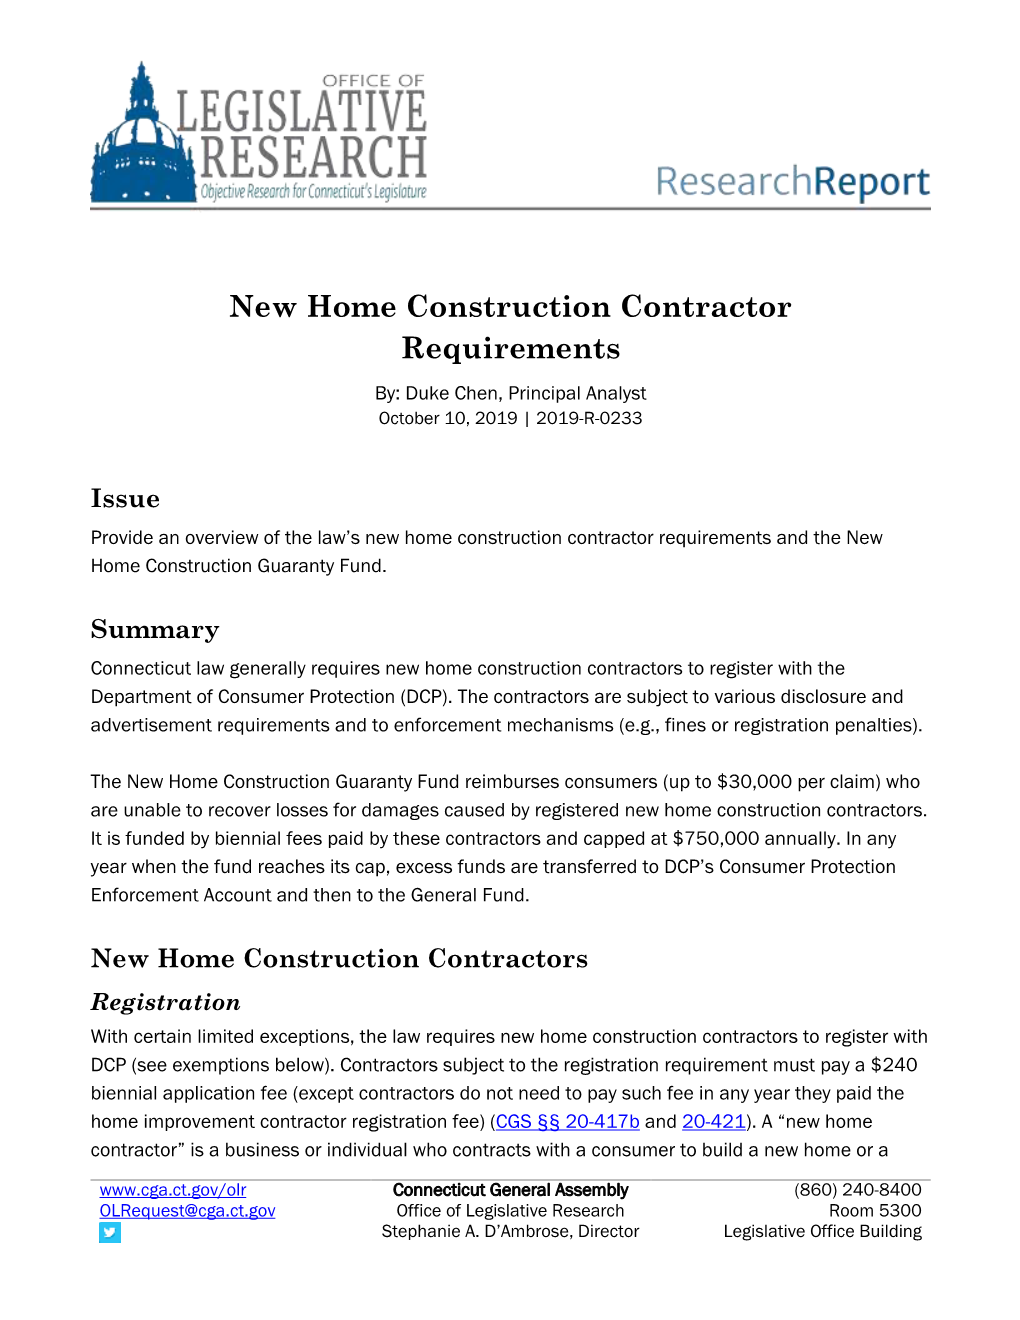 New Home Construction Contractor Requirements